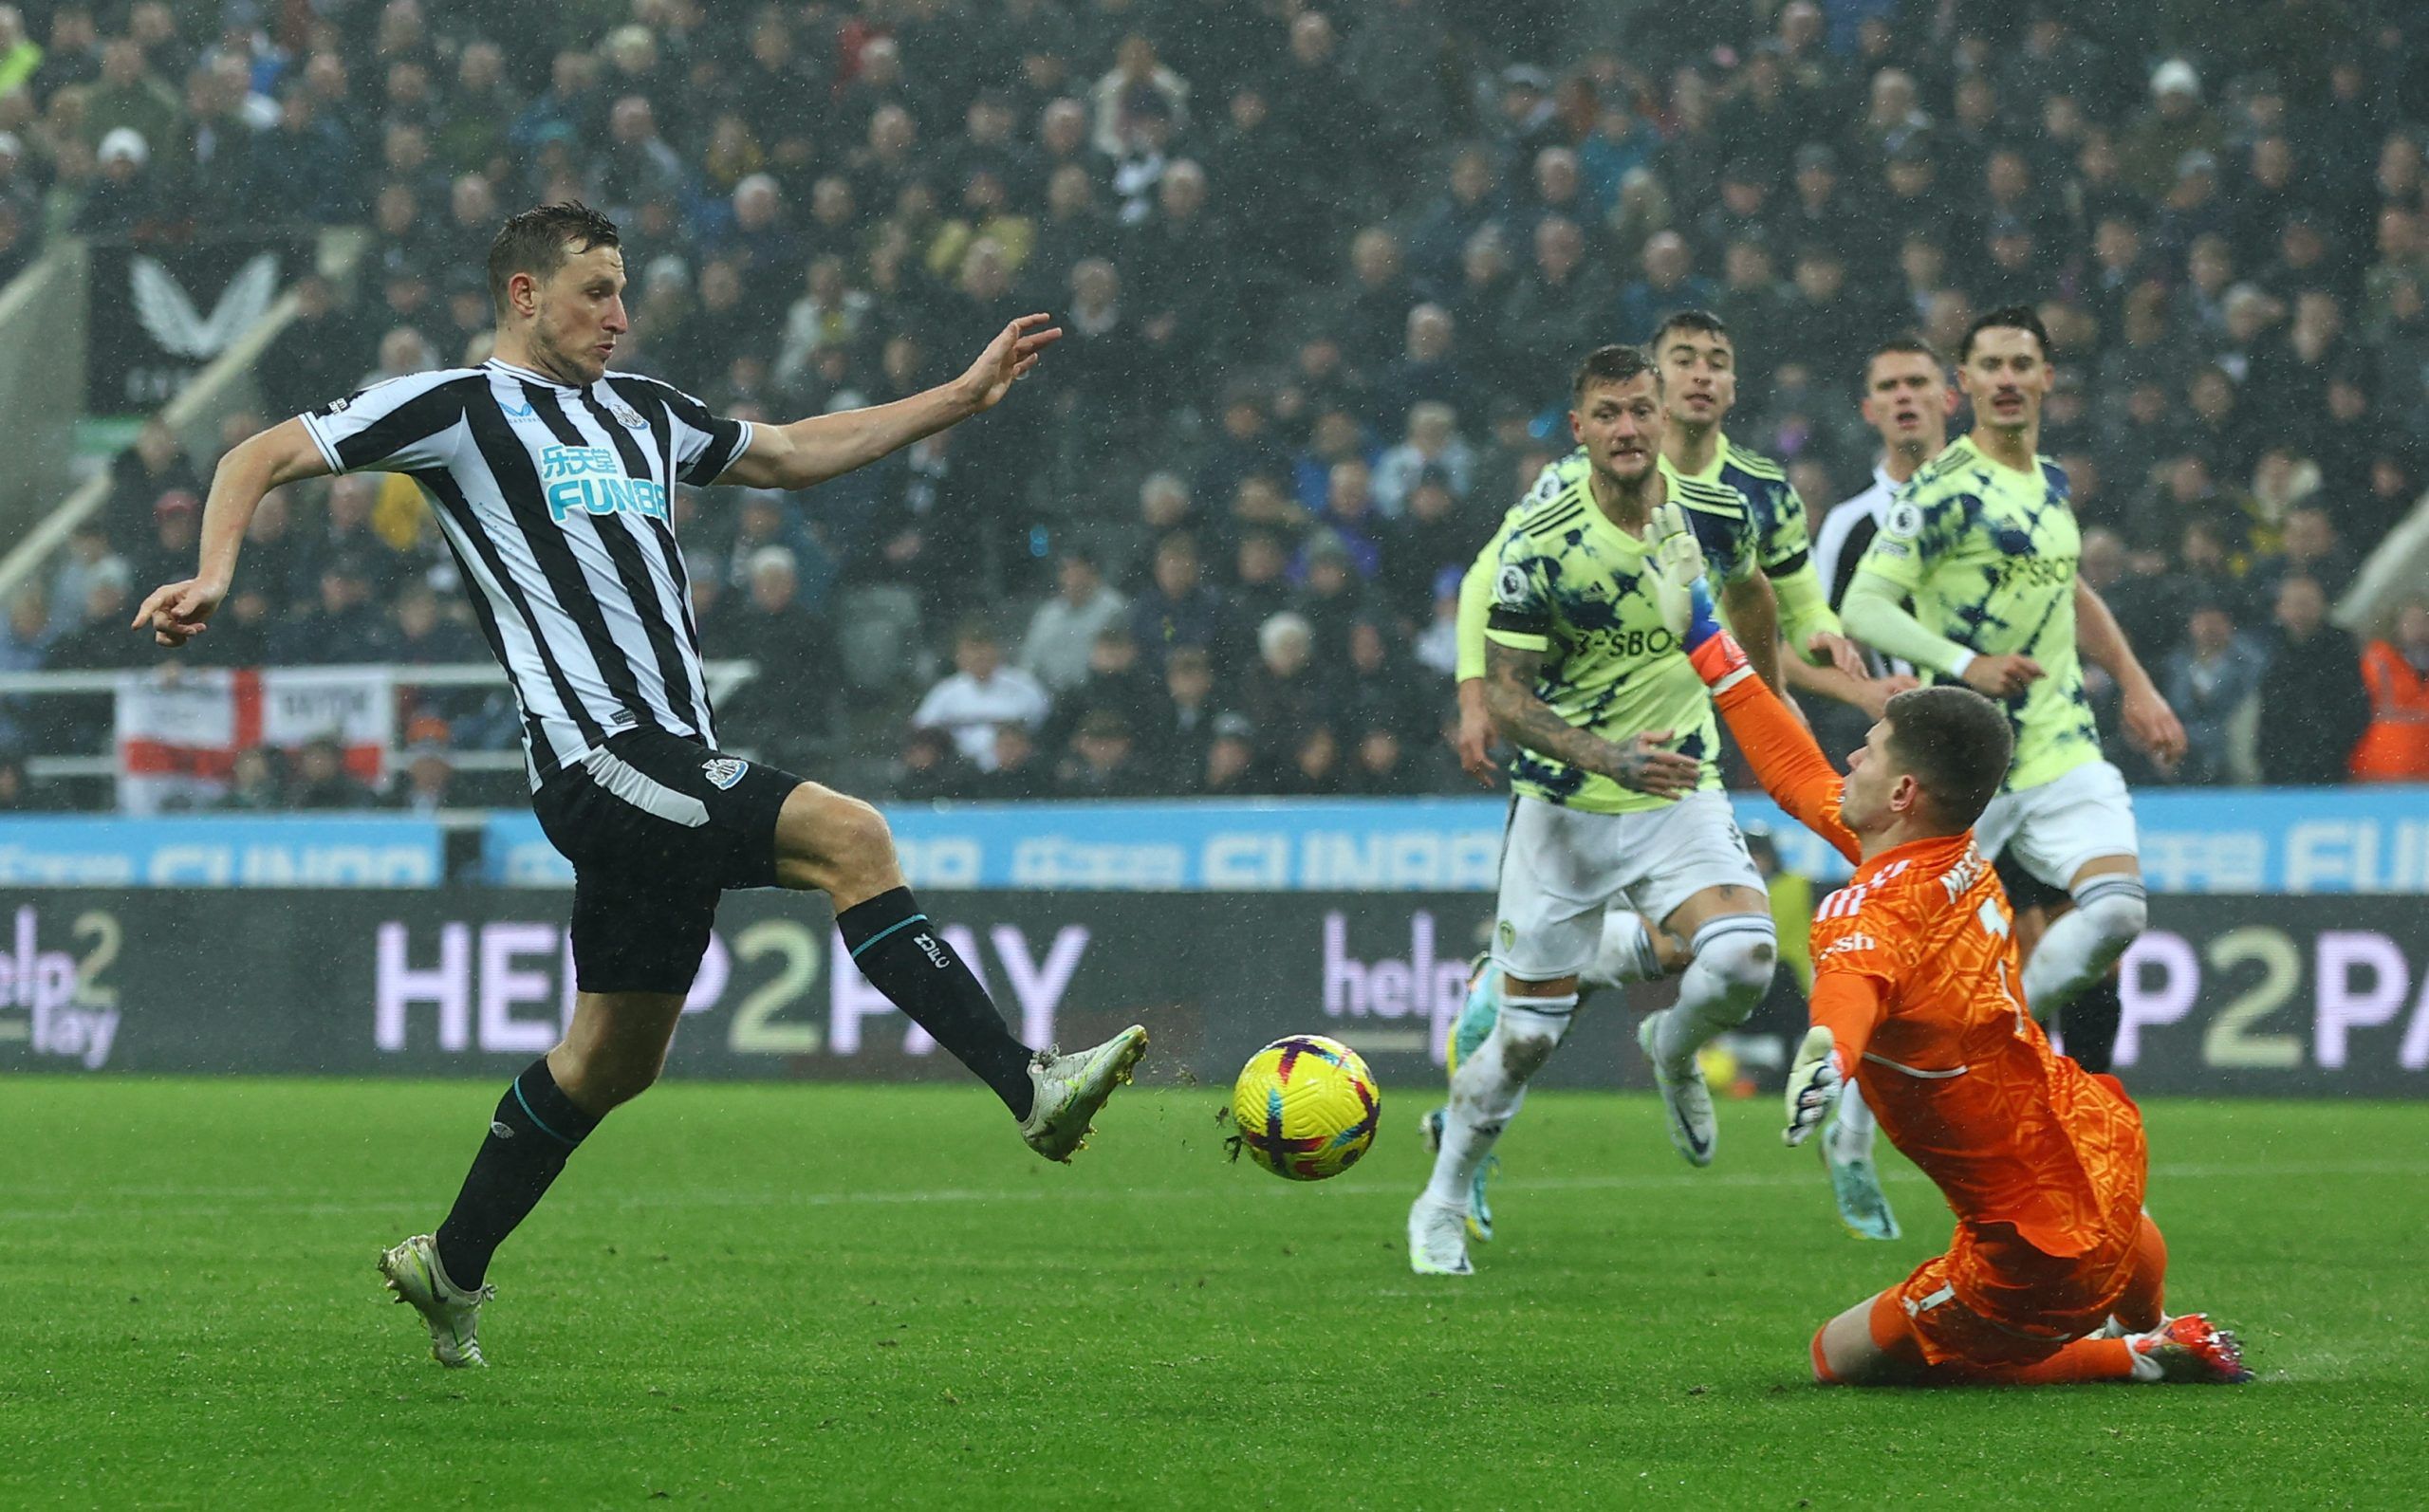 Soccer Football - Premier League - Newcastle United v Leeds United - St James' Park, Newcastle, Britain - December 31, 2022 Leeds United's Illan Meslier saves from Newcastle United's Chris Wood Action Images via Reuters/Lee Smith EDITORIAL USE ONLY. No use with unauthorized audio, video, data, fixture lists, club/league logos or 'live' services. Online in-match use limited to 75 images, no video emulation. No use in betting, games or single club /league/player publications.  Please contact your 